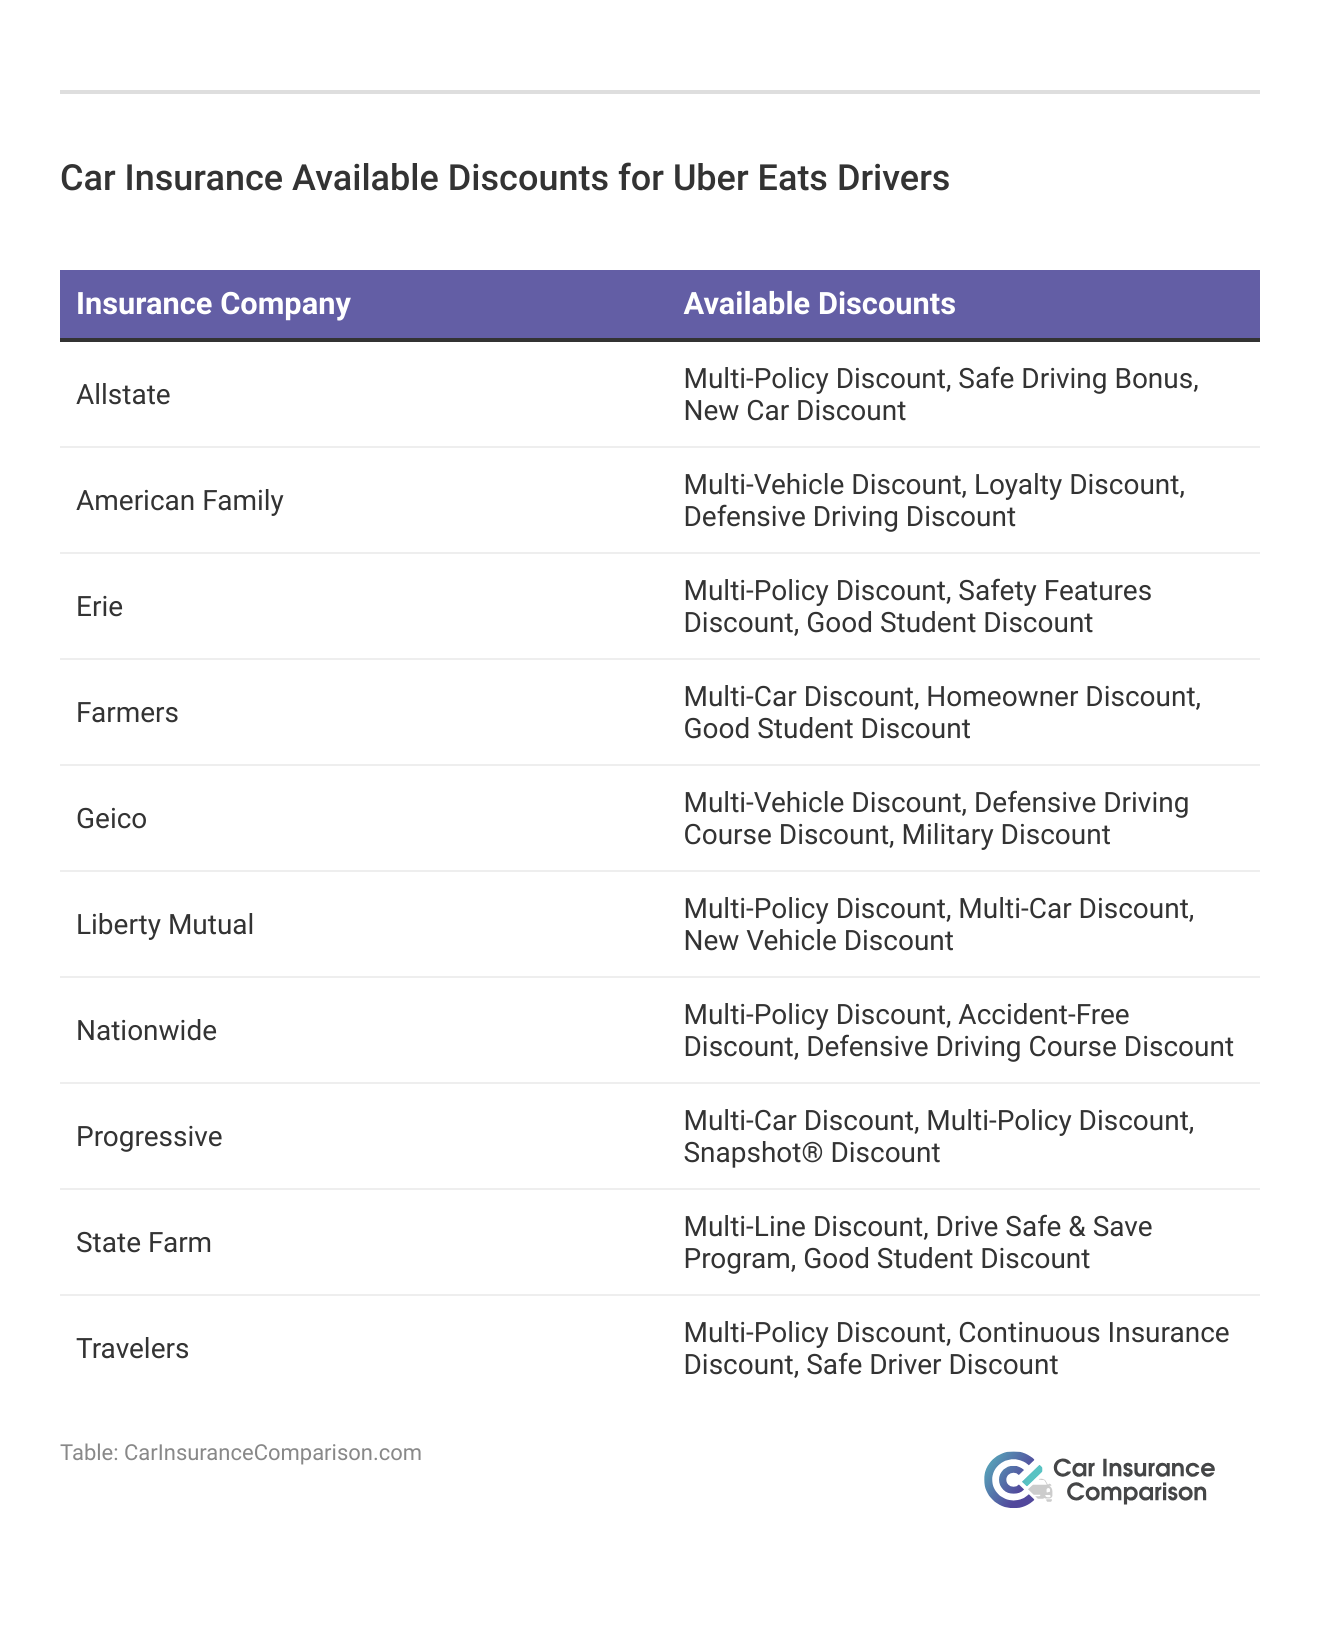 <h3>Car Insurance Available Discounts for Uber Eats Drivers</h3> 